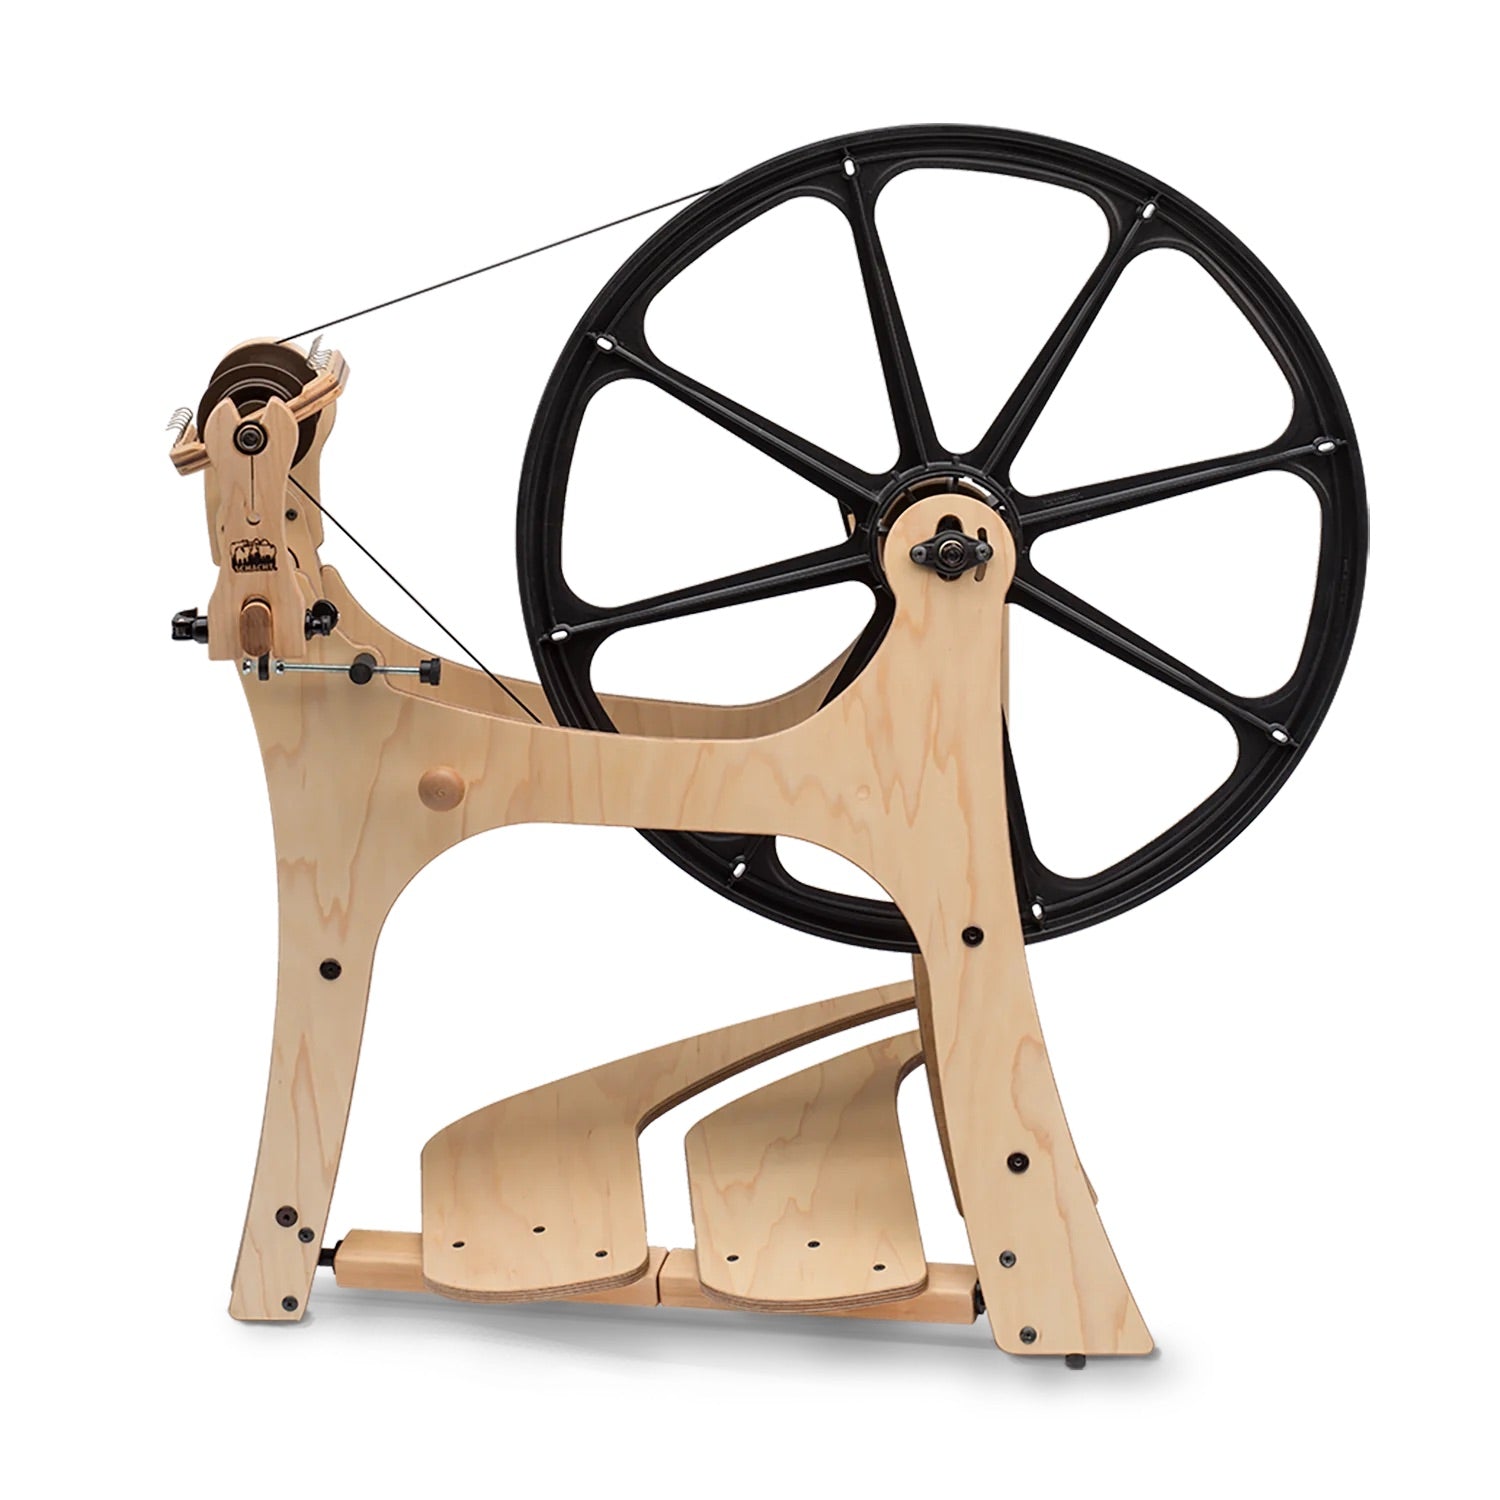 The Flatiron Spinning Wheel Assembly, Maintenance & Warranty cover